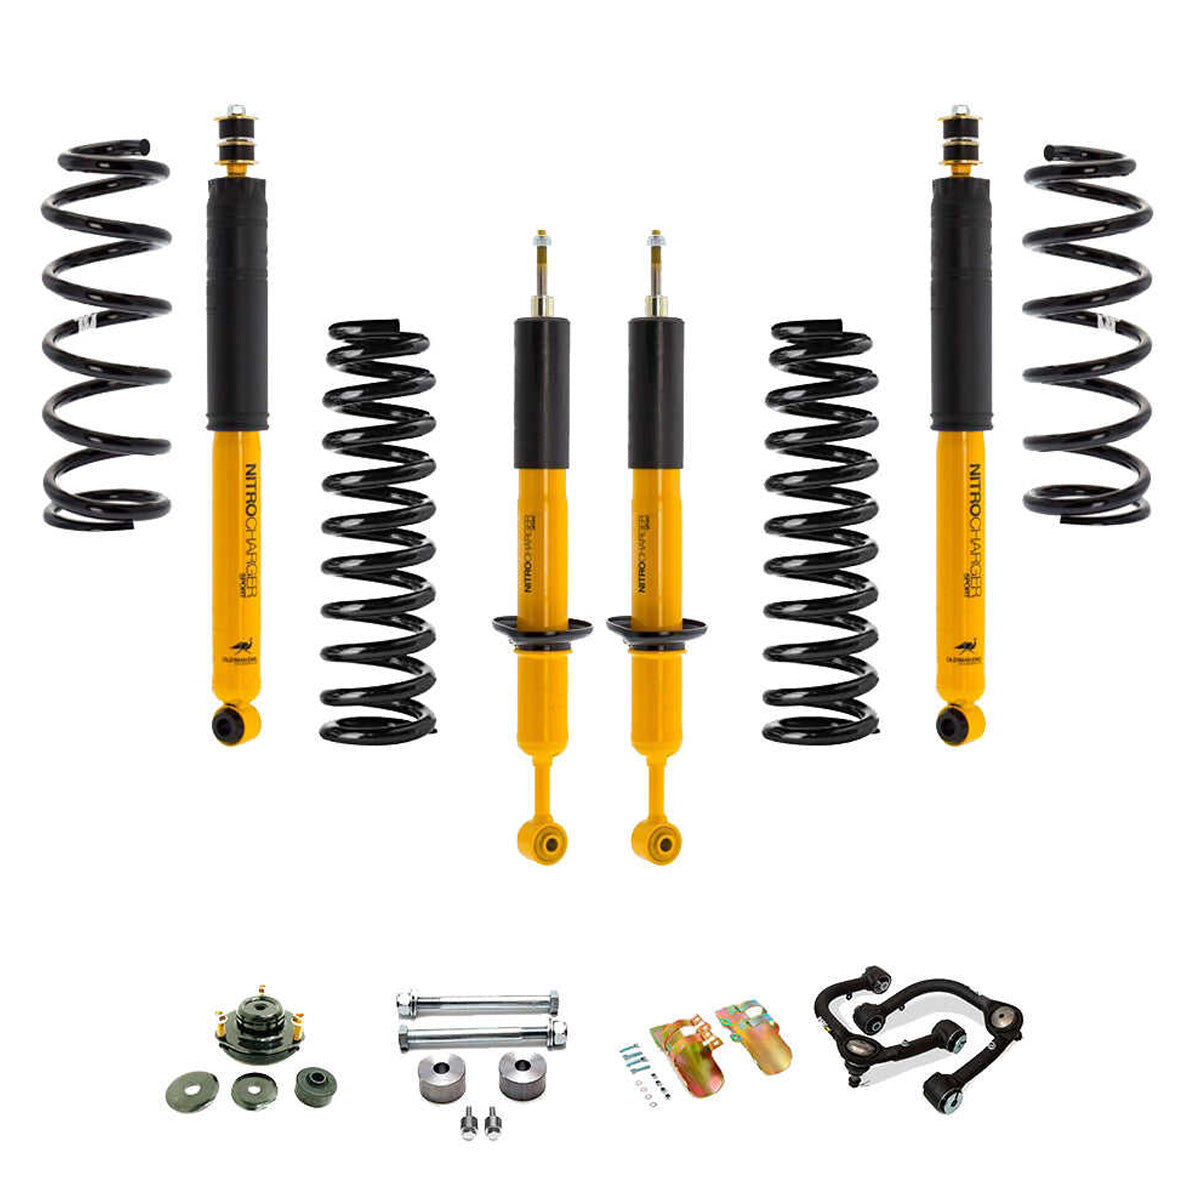 OME 2.5 inch Lift Kit for Lexus GX470 (03-09)